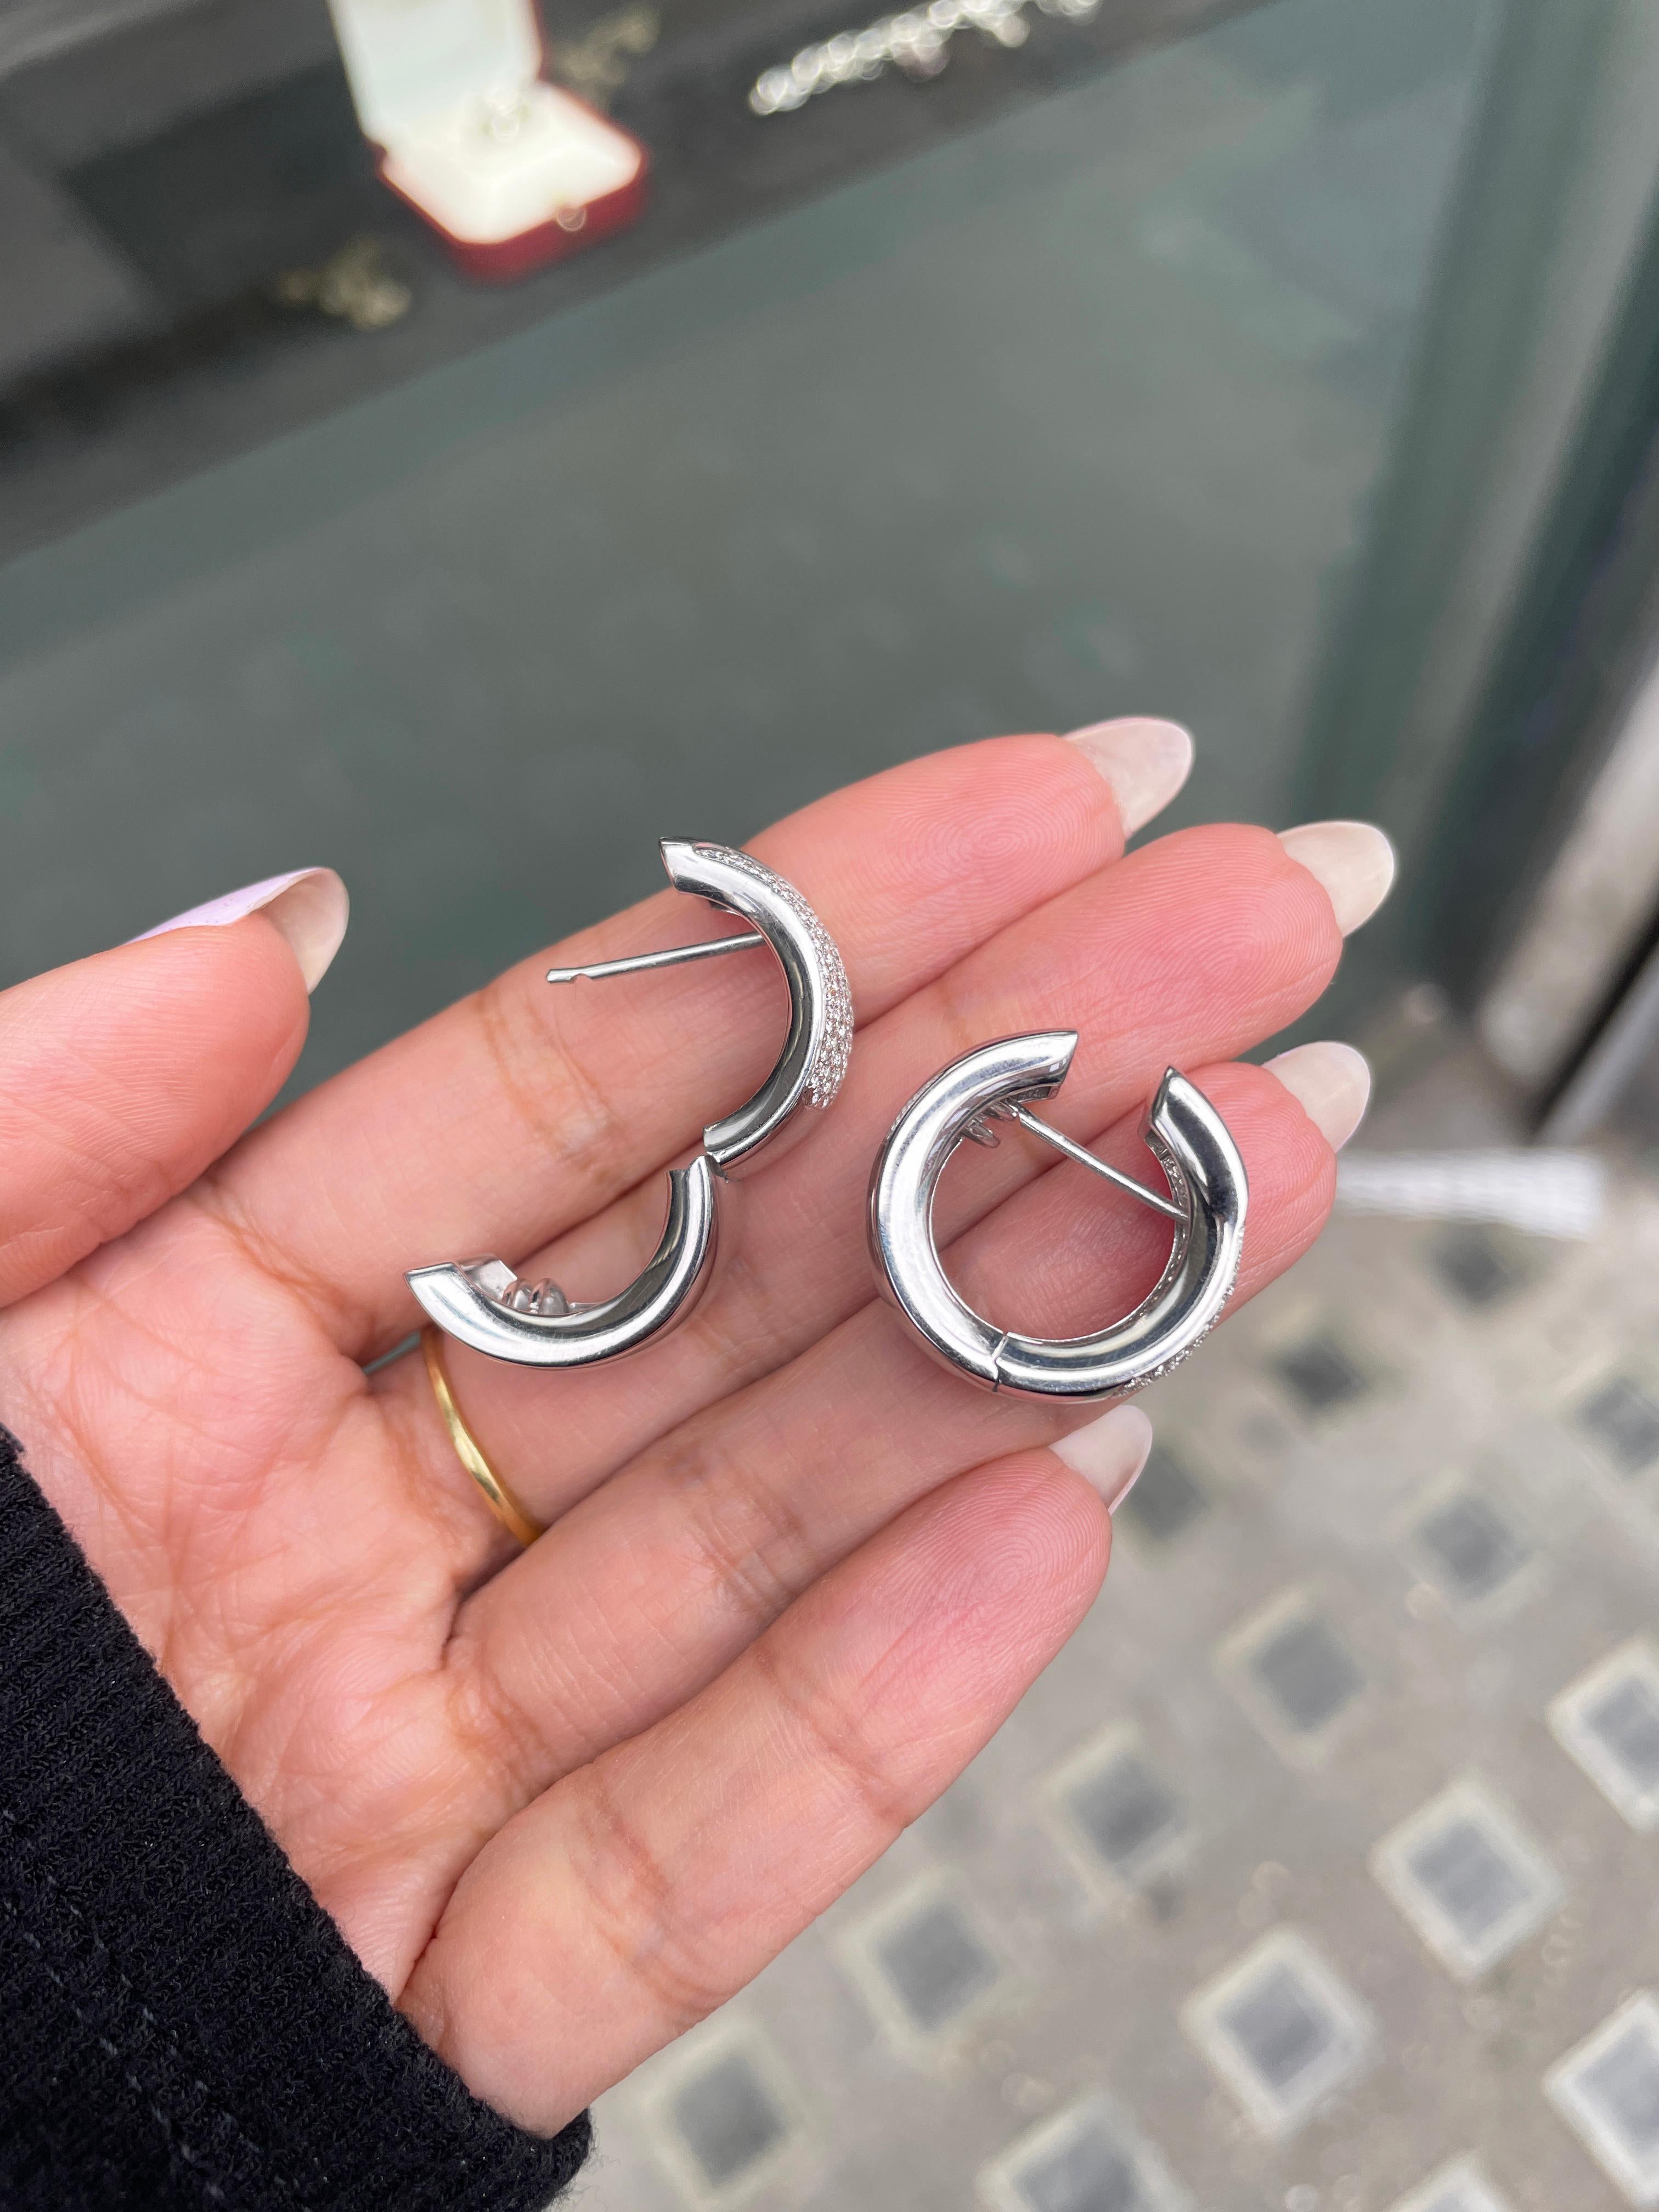 Diamond 18 Carat White Gold Wide Huggie Hoop Earrings In Excellent Condition For Sale In London, GB